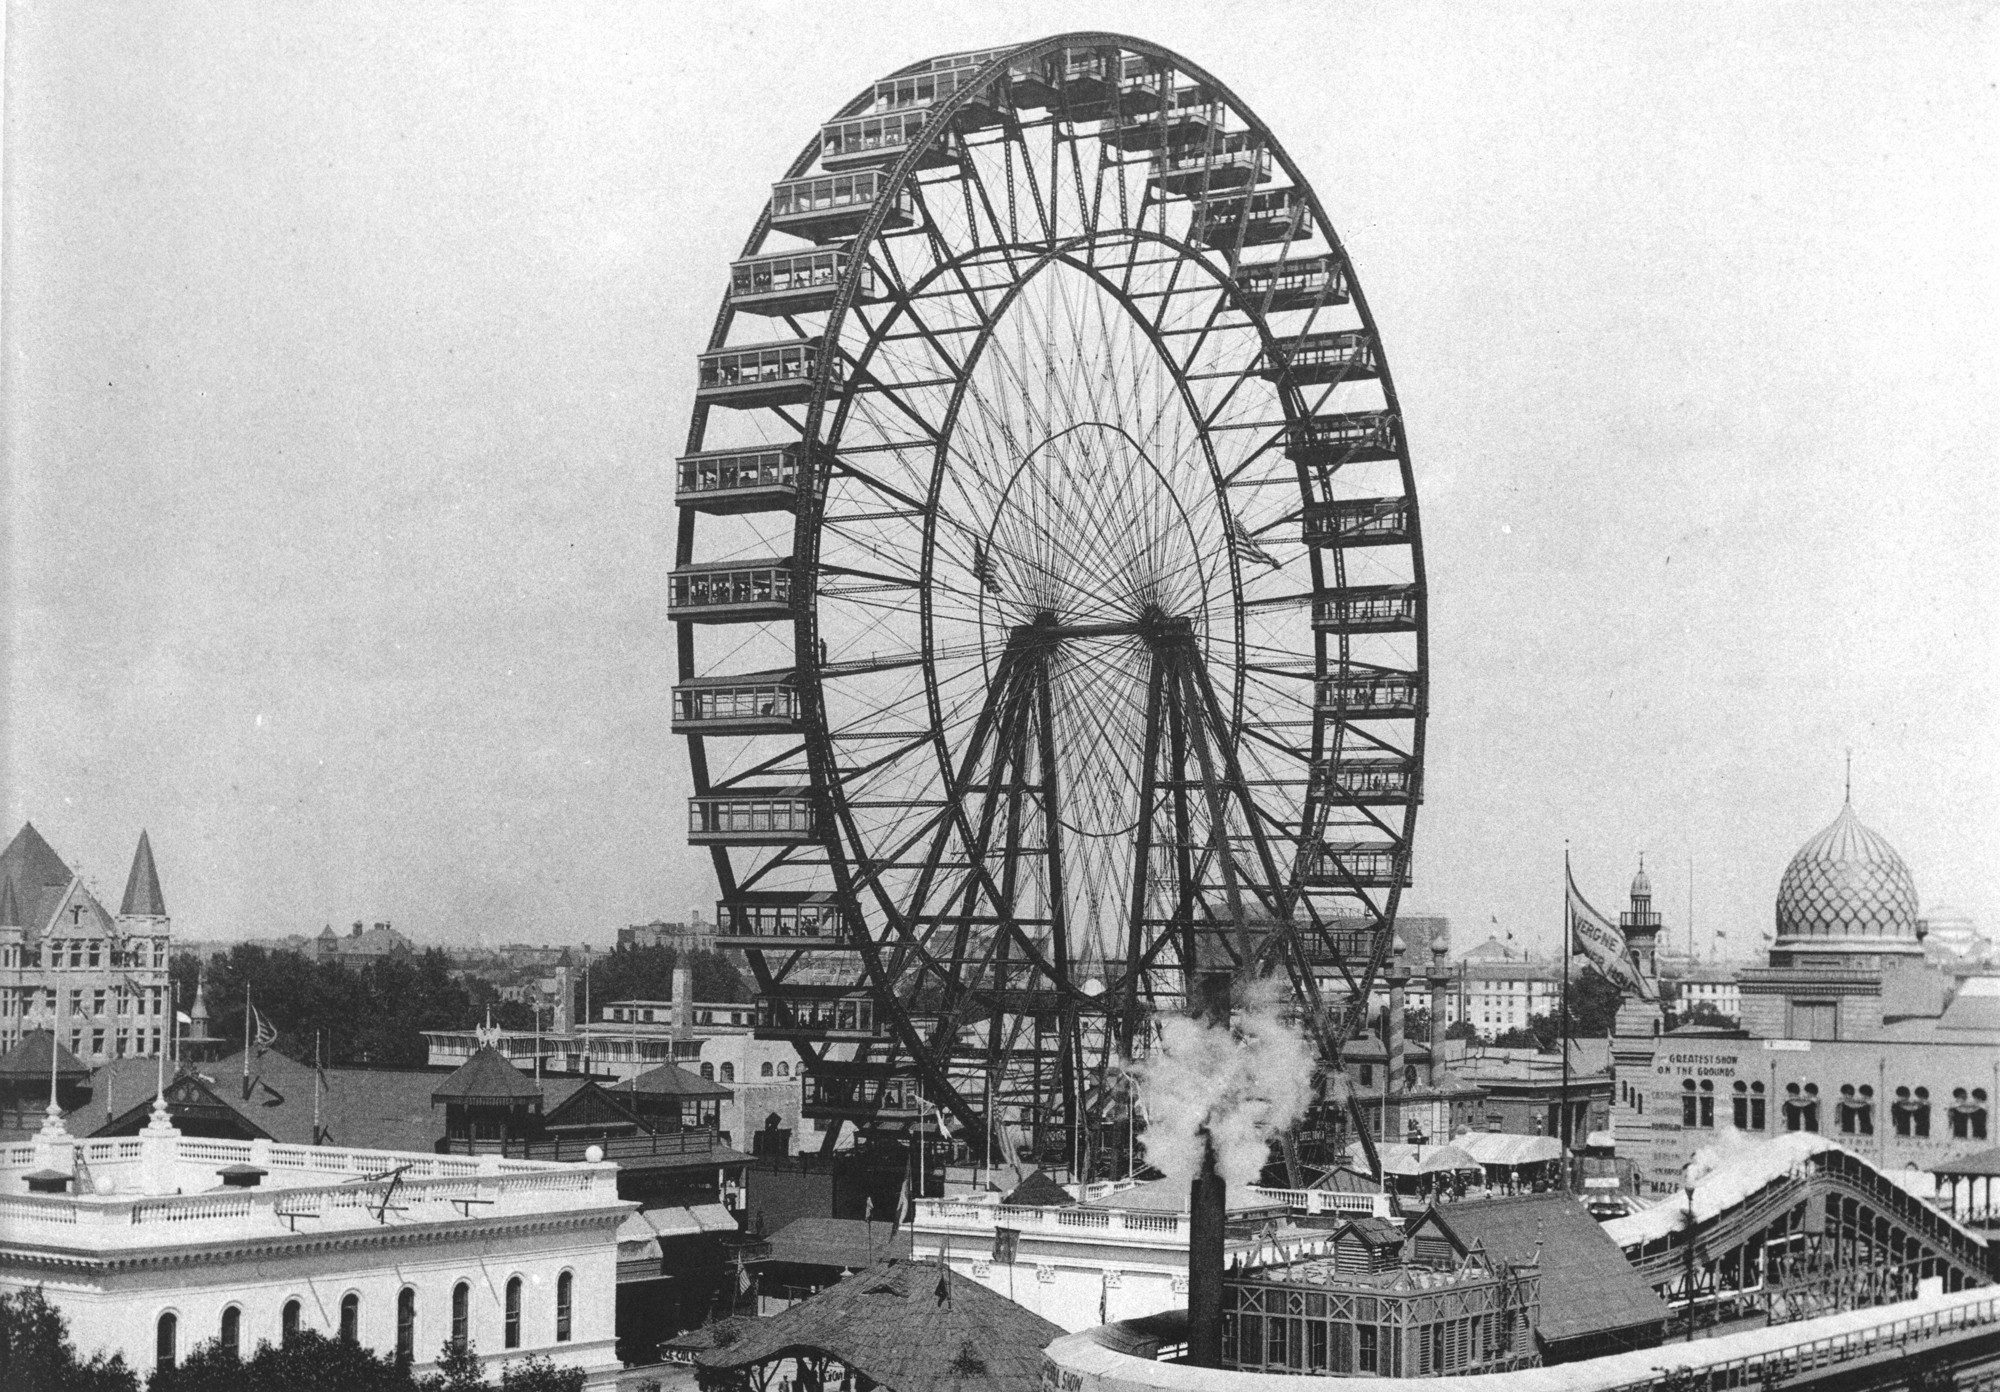 The best Inventions in the world- THE WHEEL”